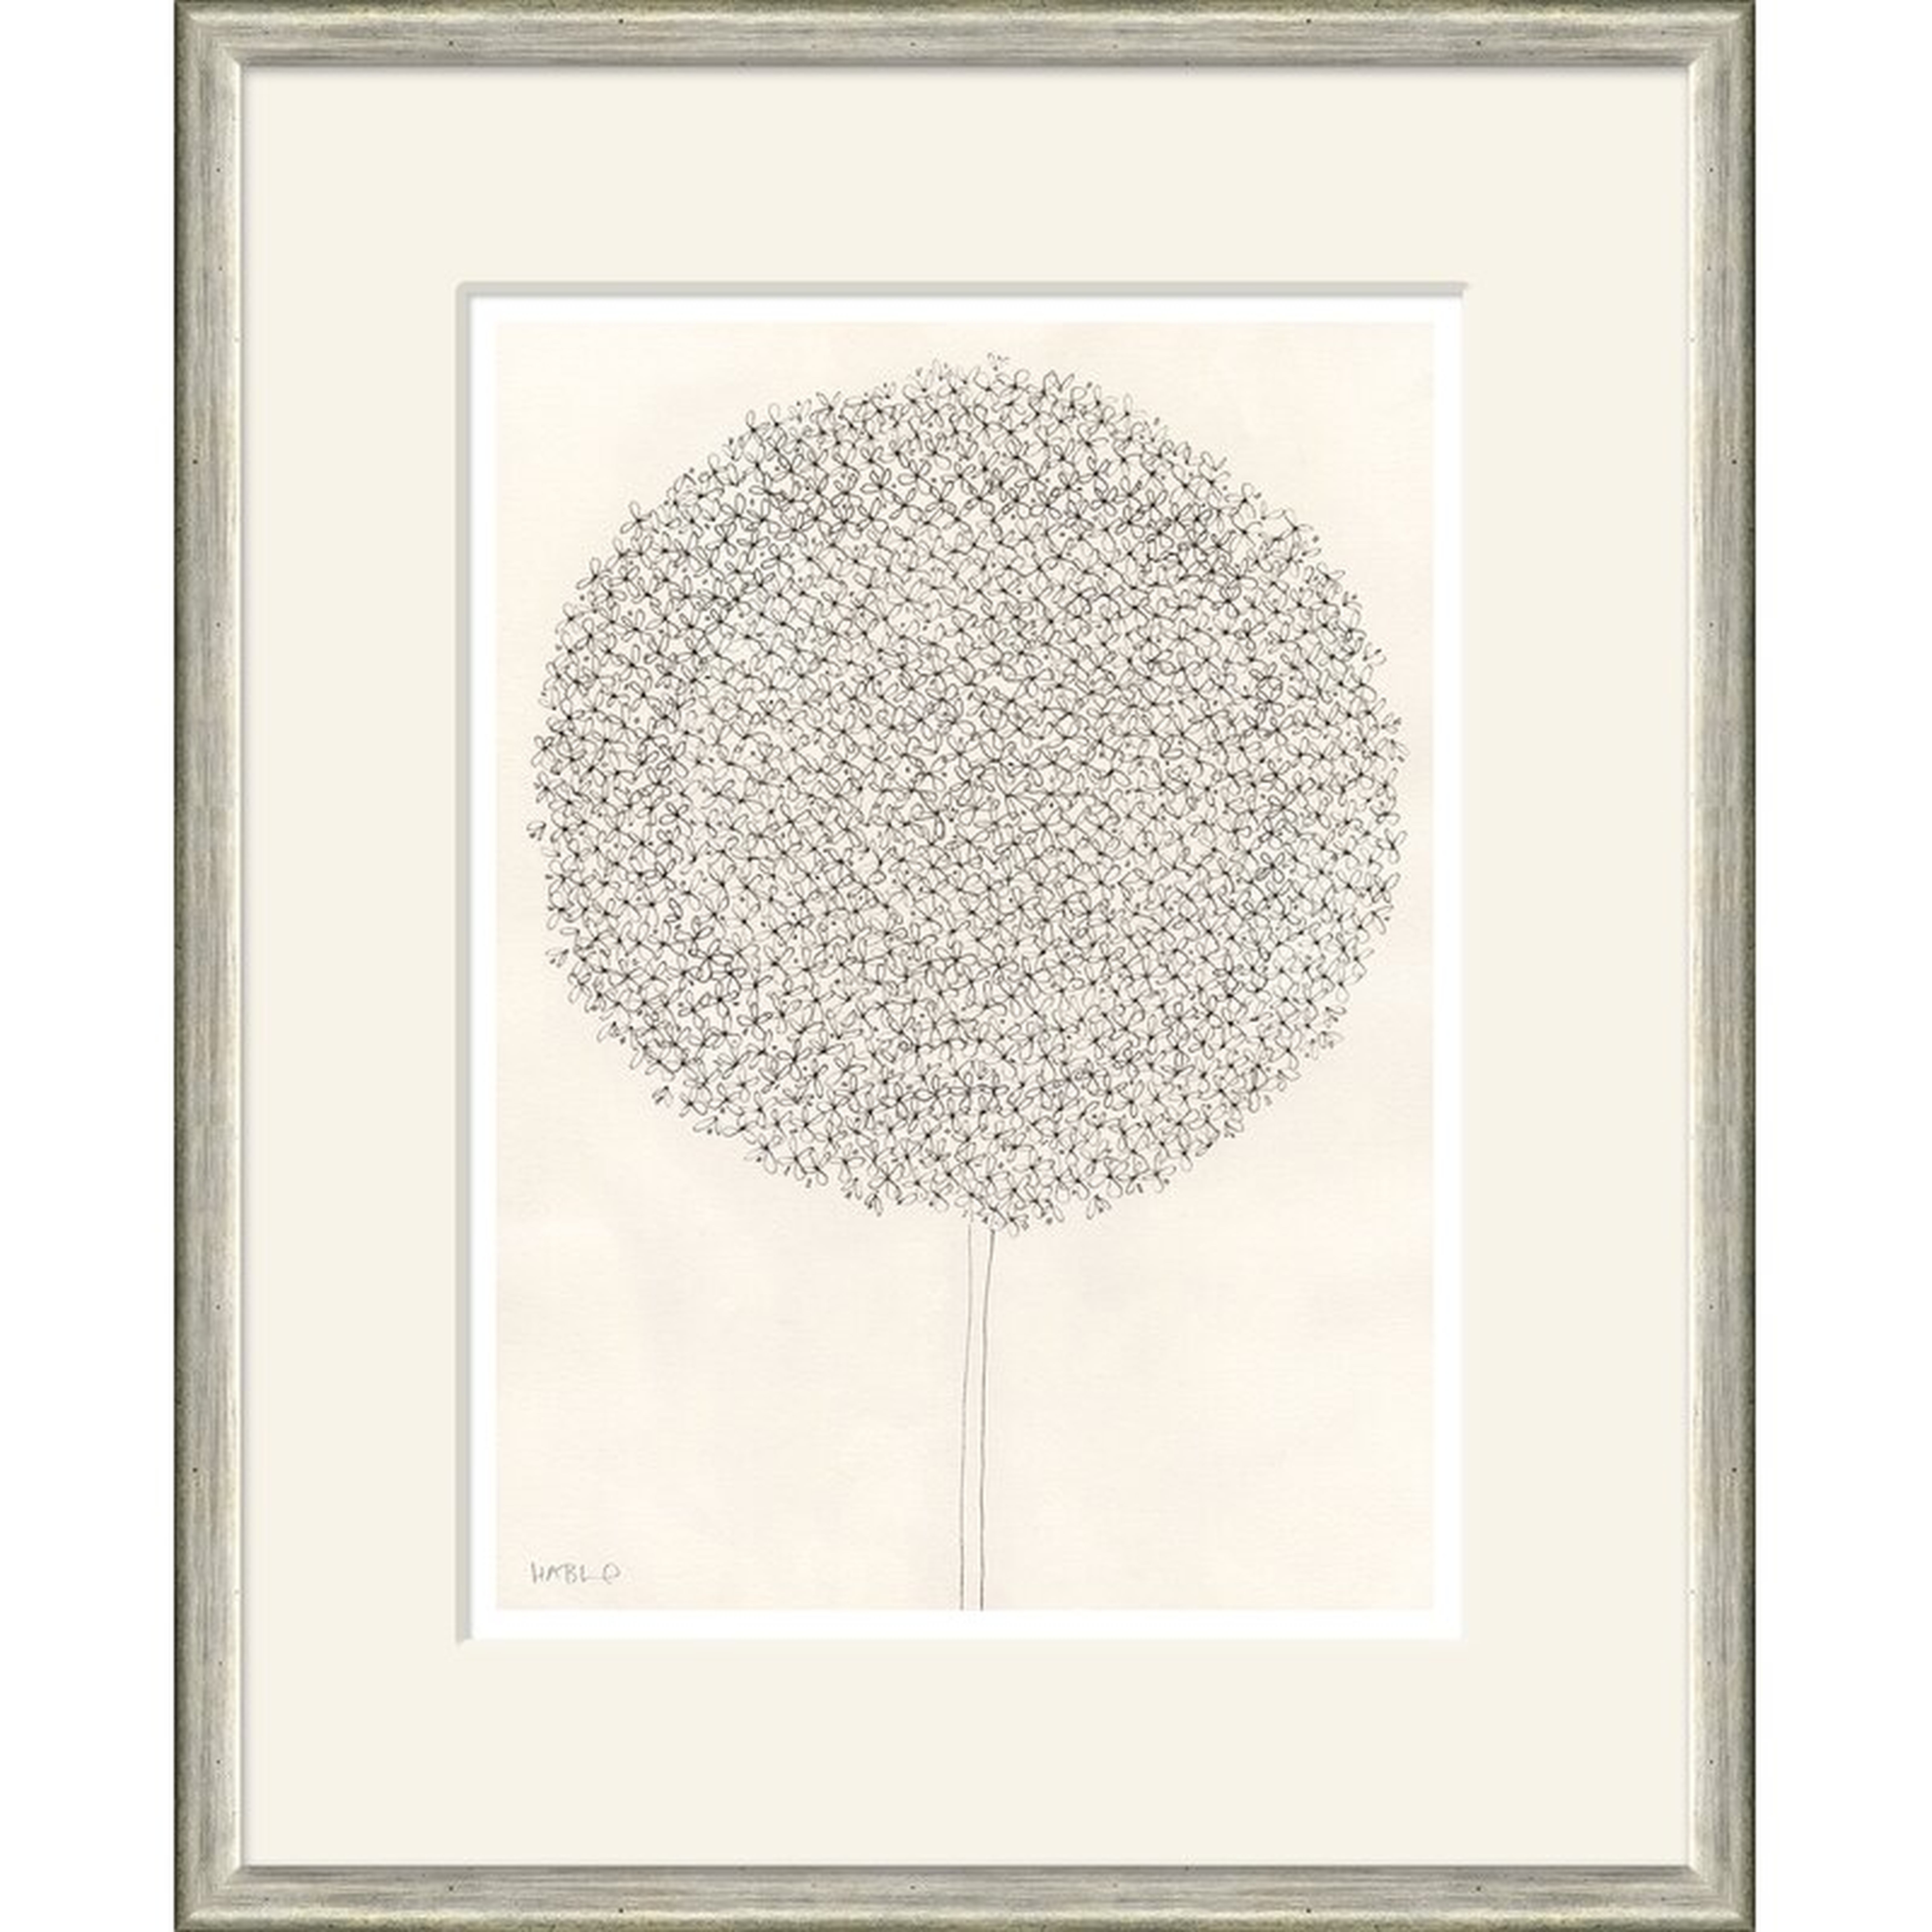 Soicher Marin Dandelion' by Susan Hable - Picture Frame Print on Paper - Perigold